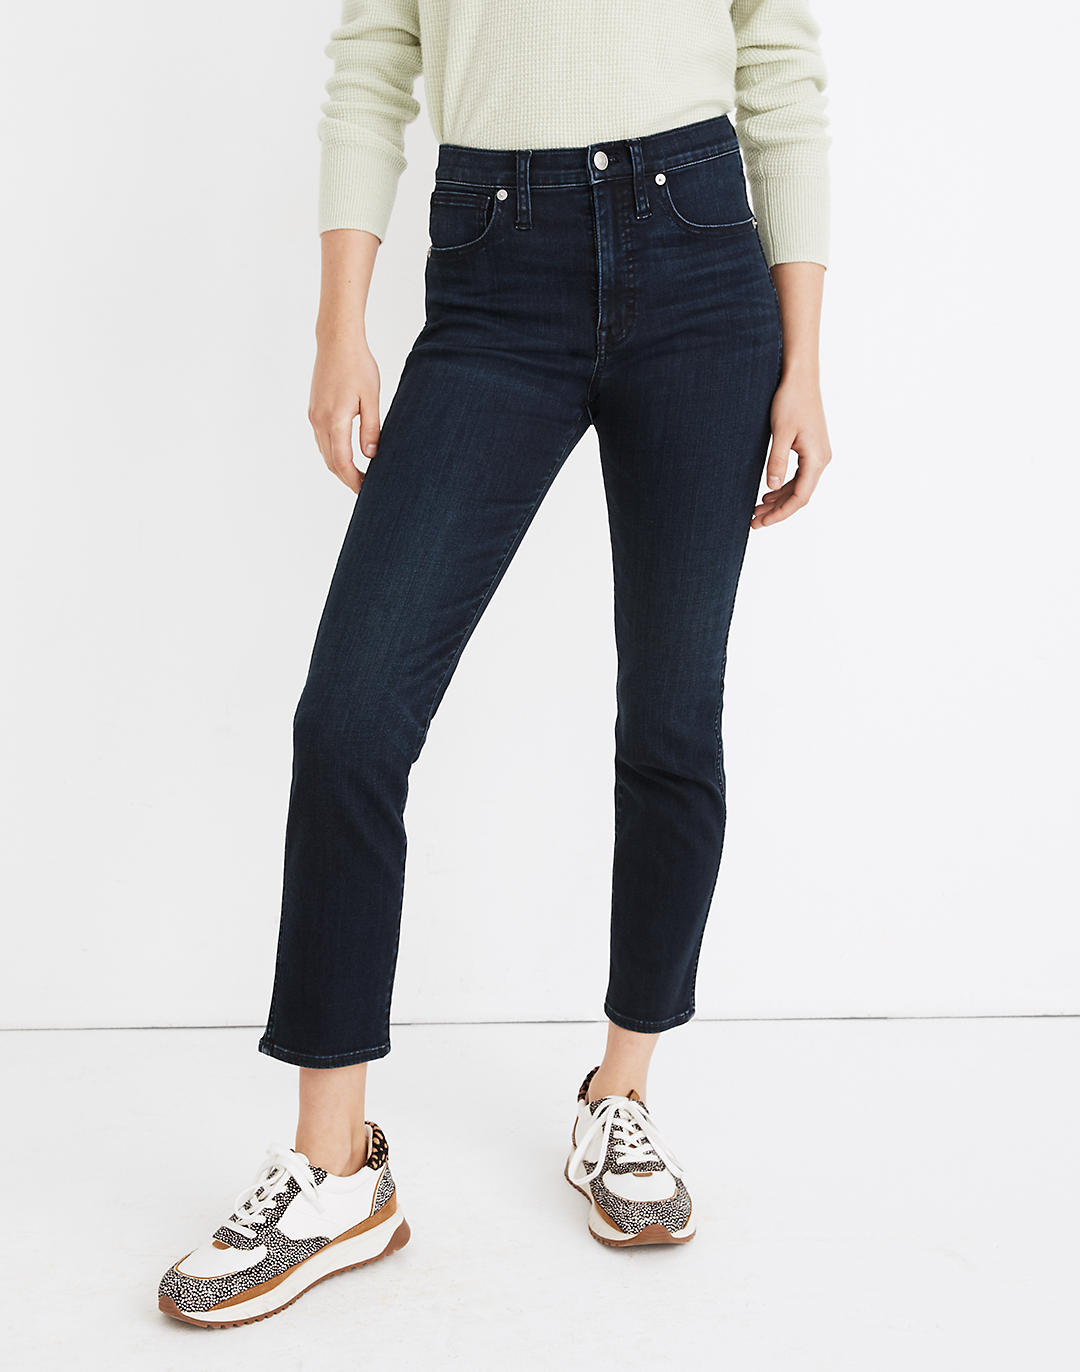 Women's Stovepipe Jeans in Macintosh Wash | Madewell